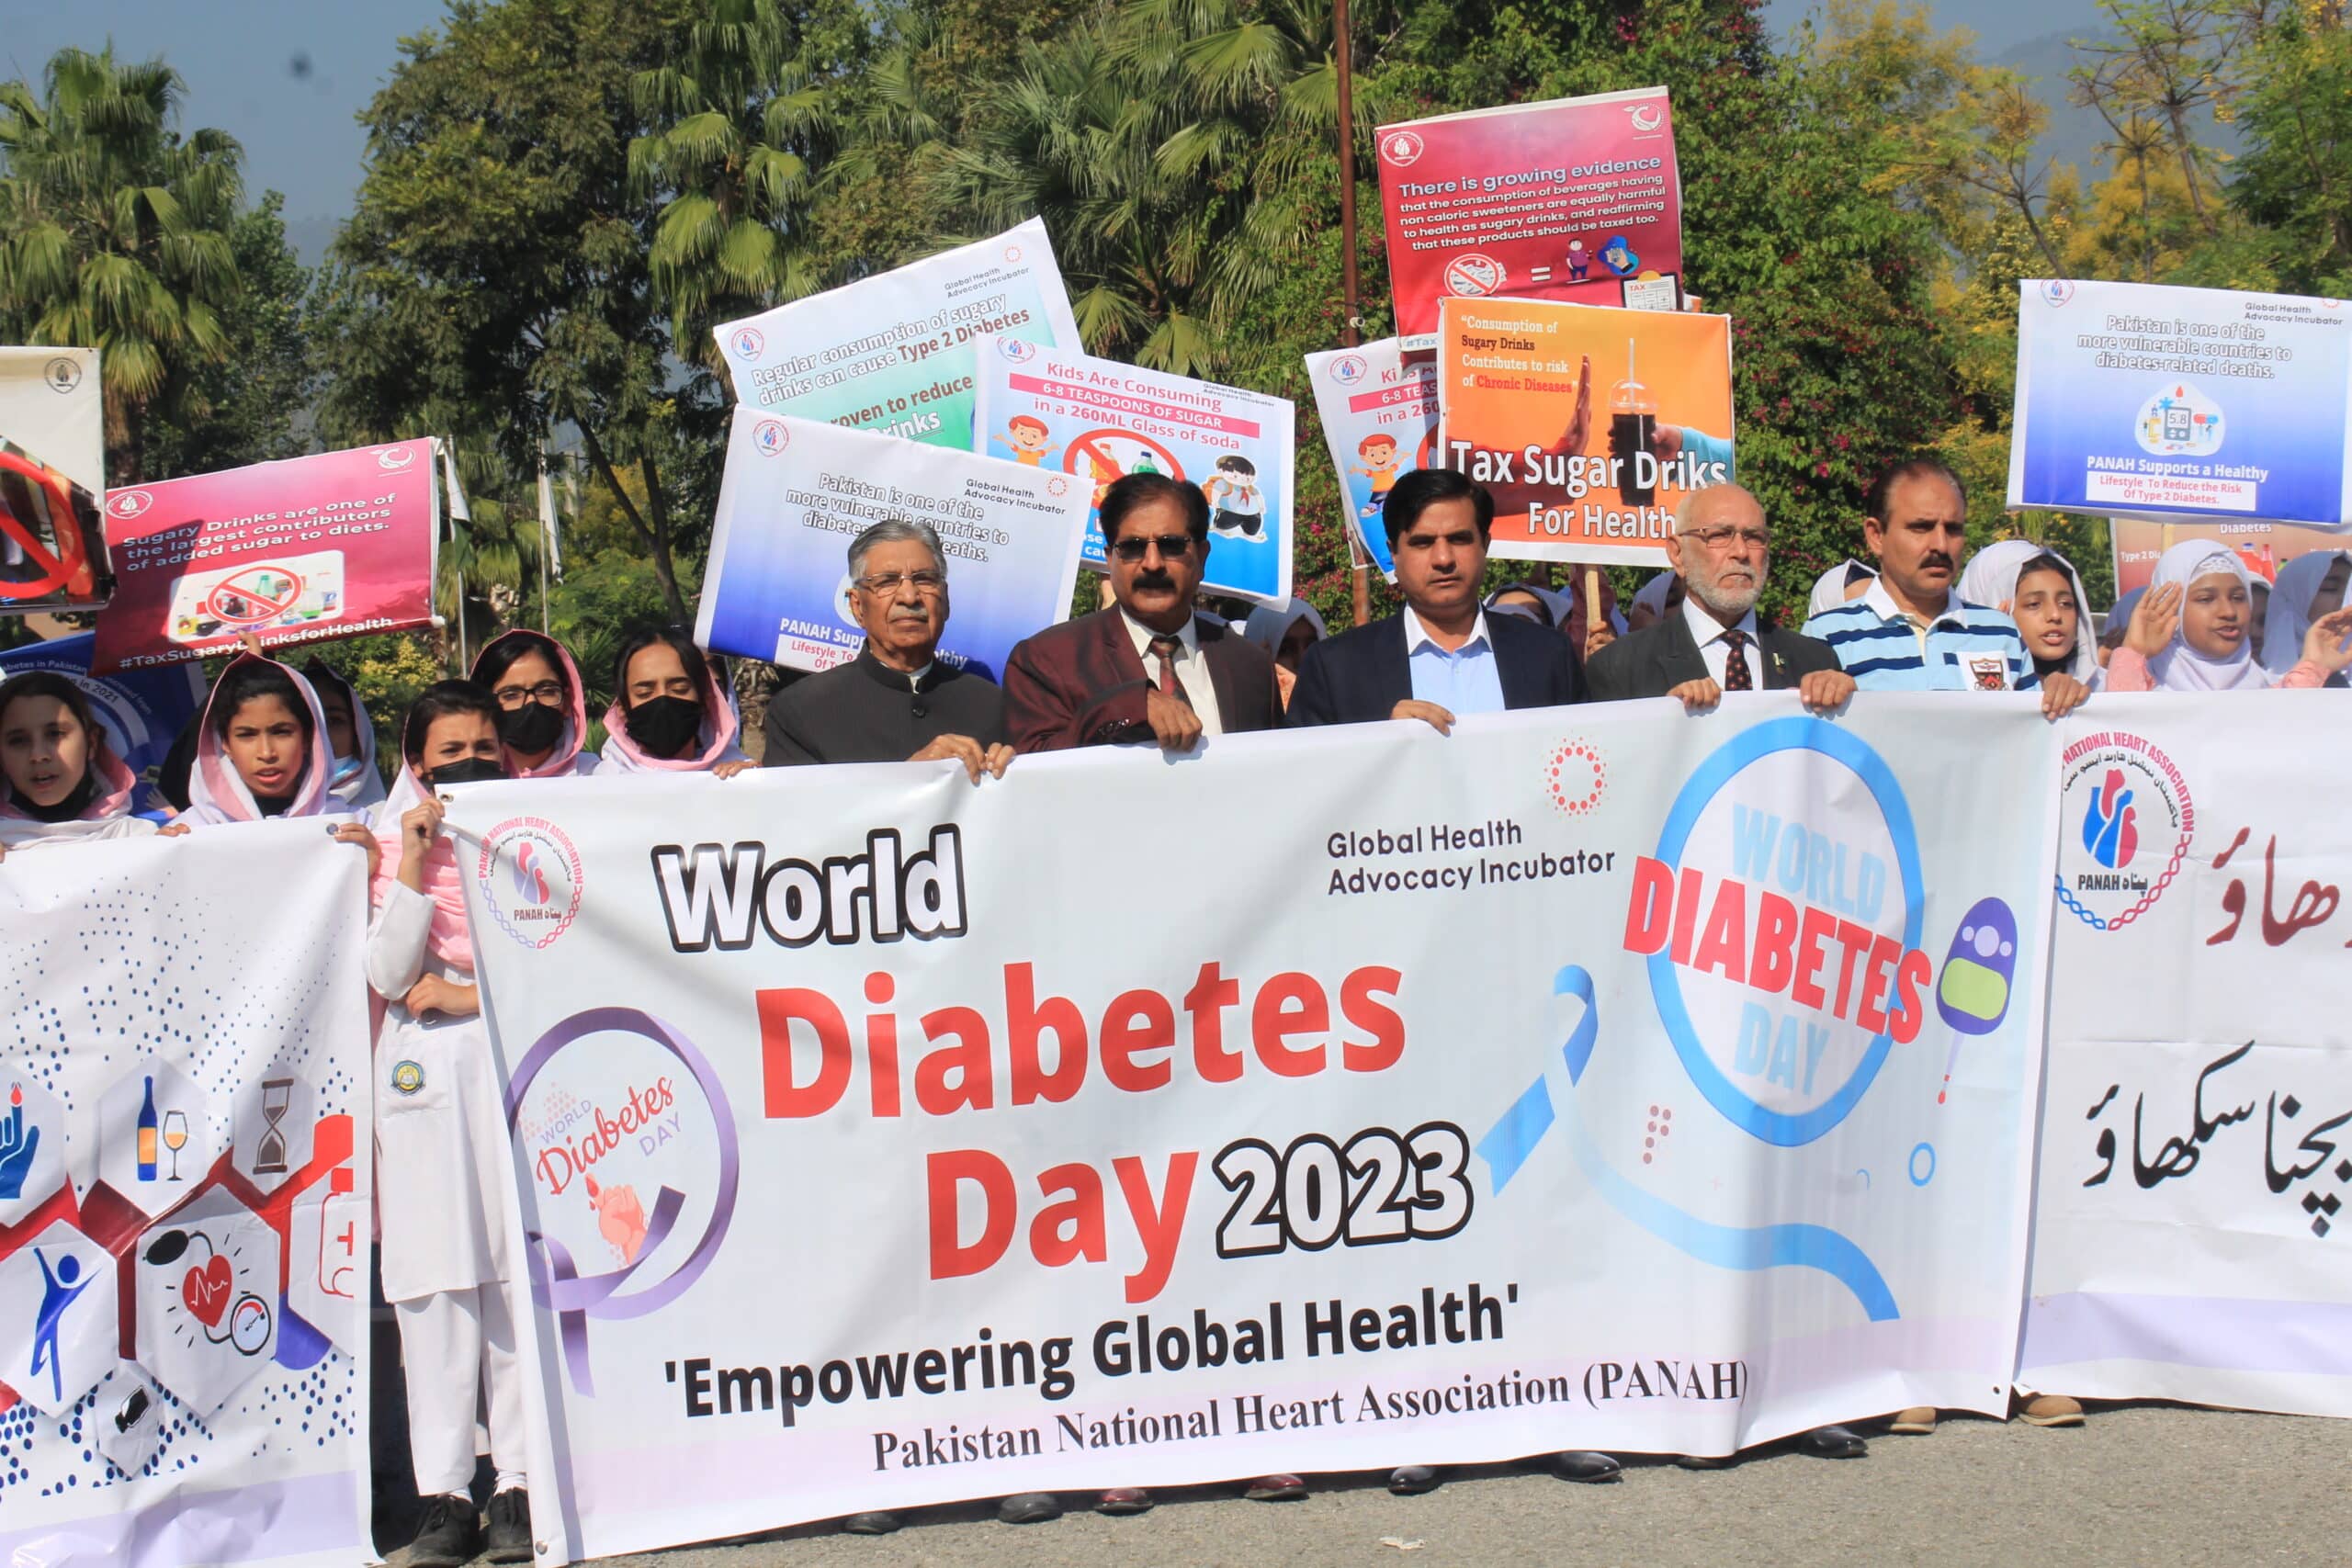 Pakistan National Heart Association(PANAH) Organized an walk On World Diabetes Day 2023 ,(Empowering Global Health ). Venue : In front of National Press Club Islamabad